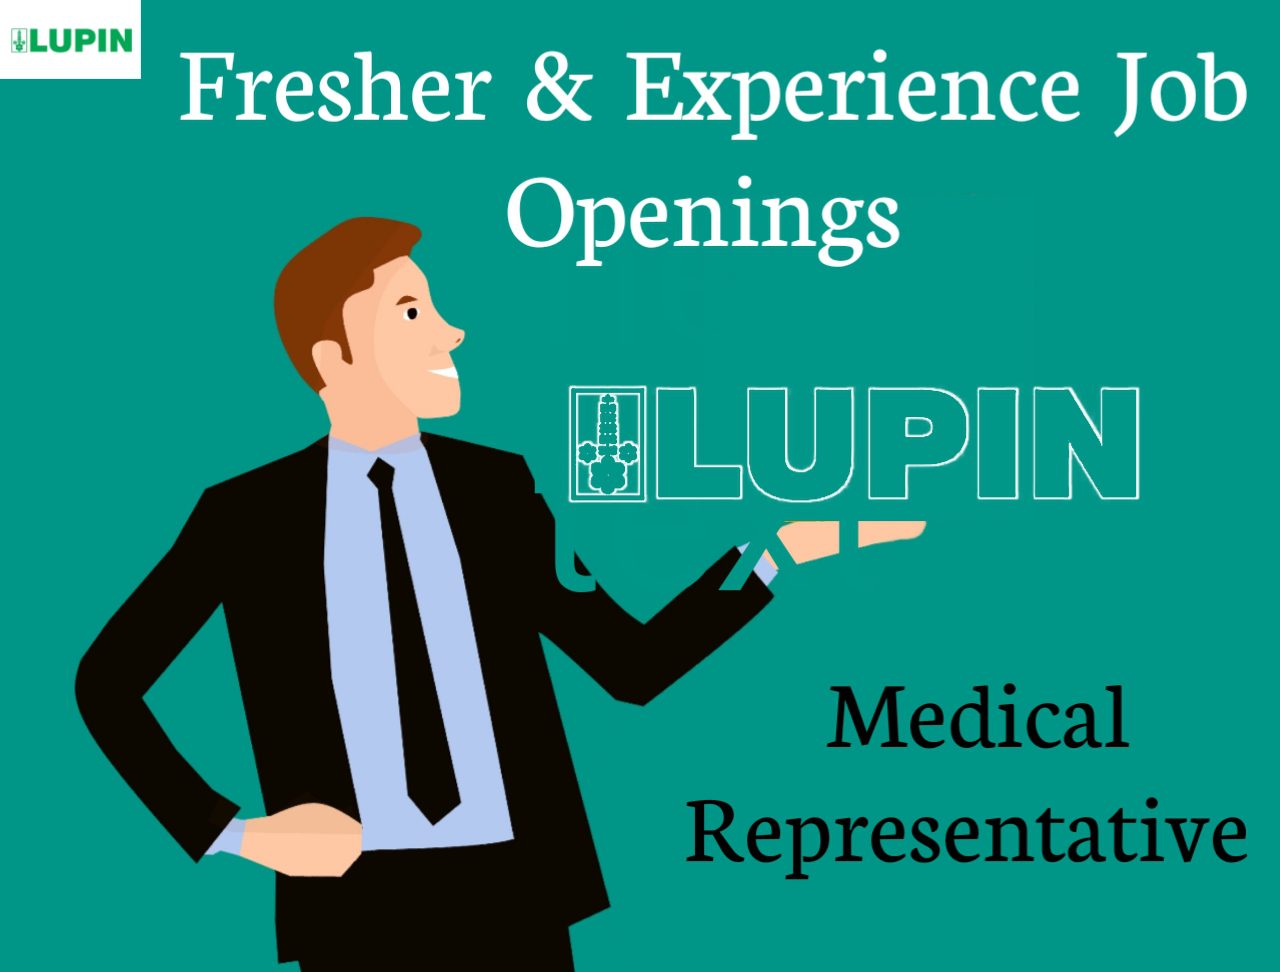 %titl lupin limited fresher experience job openings for medical representatives